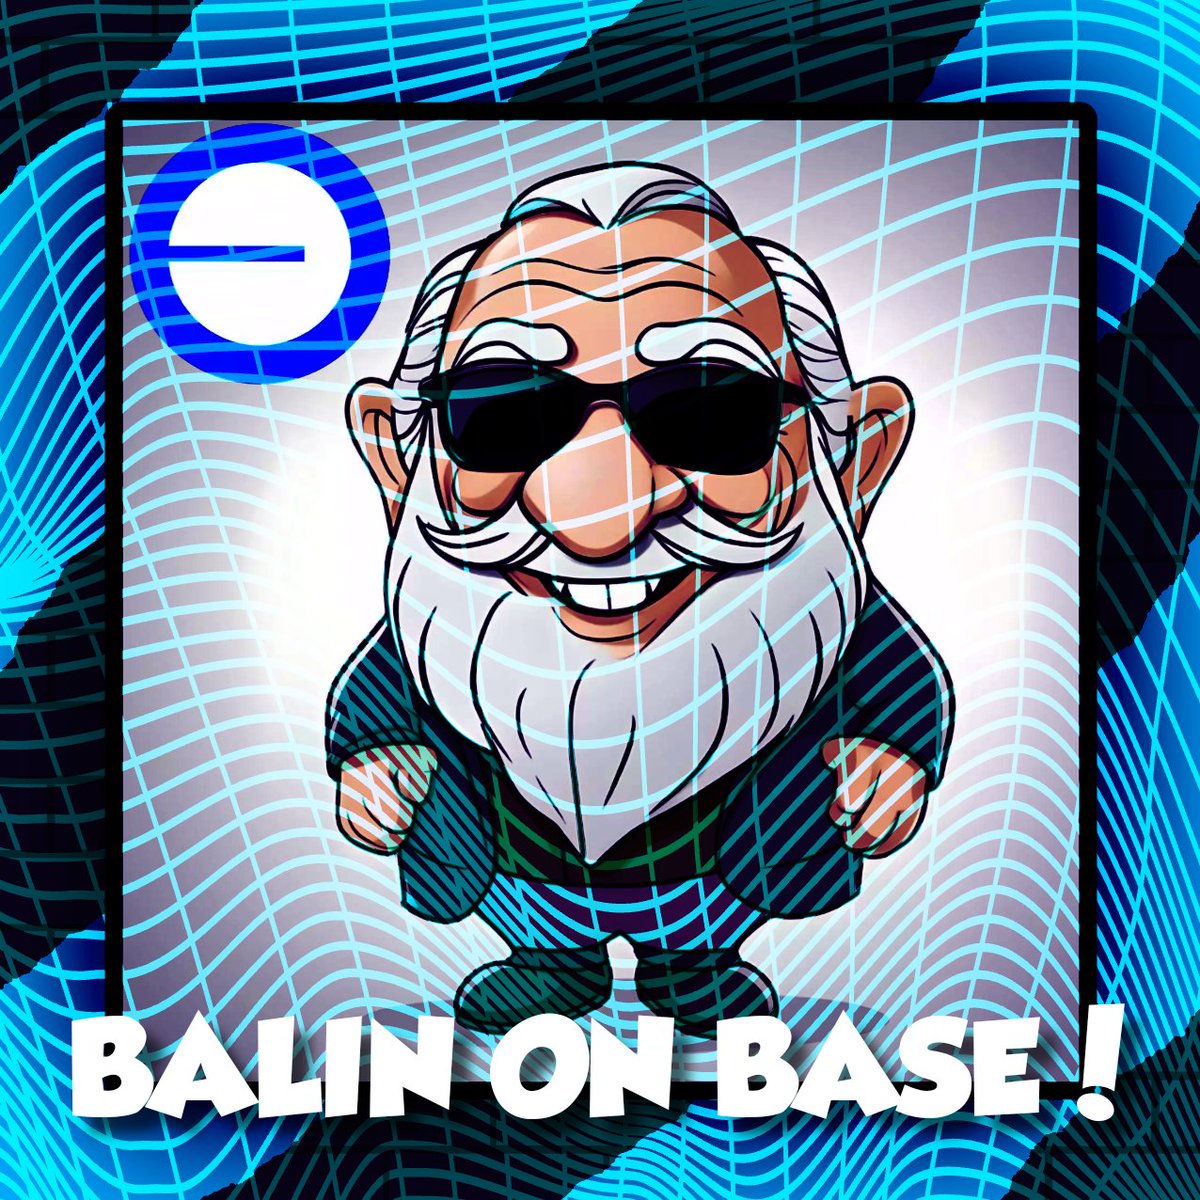 🧙‍♂️ In the hushed echoes of the ancient world, a new saga unfolds beneath the starlit sky of Base Chain. 📗 Behold, as $Balin, the guardian of forgotten treasures, embarks upon a journey through the digital realms. Let the wise and the brave heed this call, for the keys to the